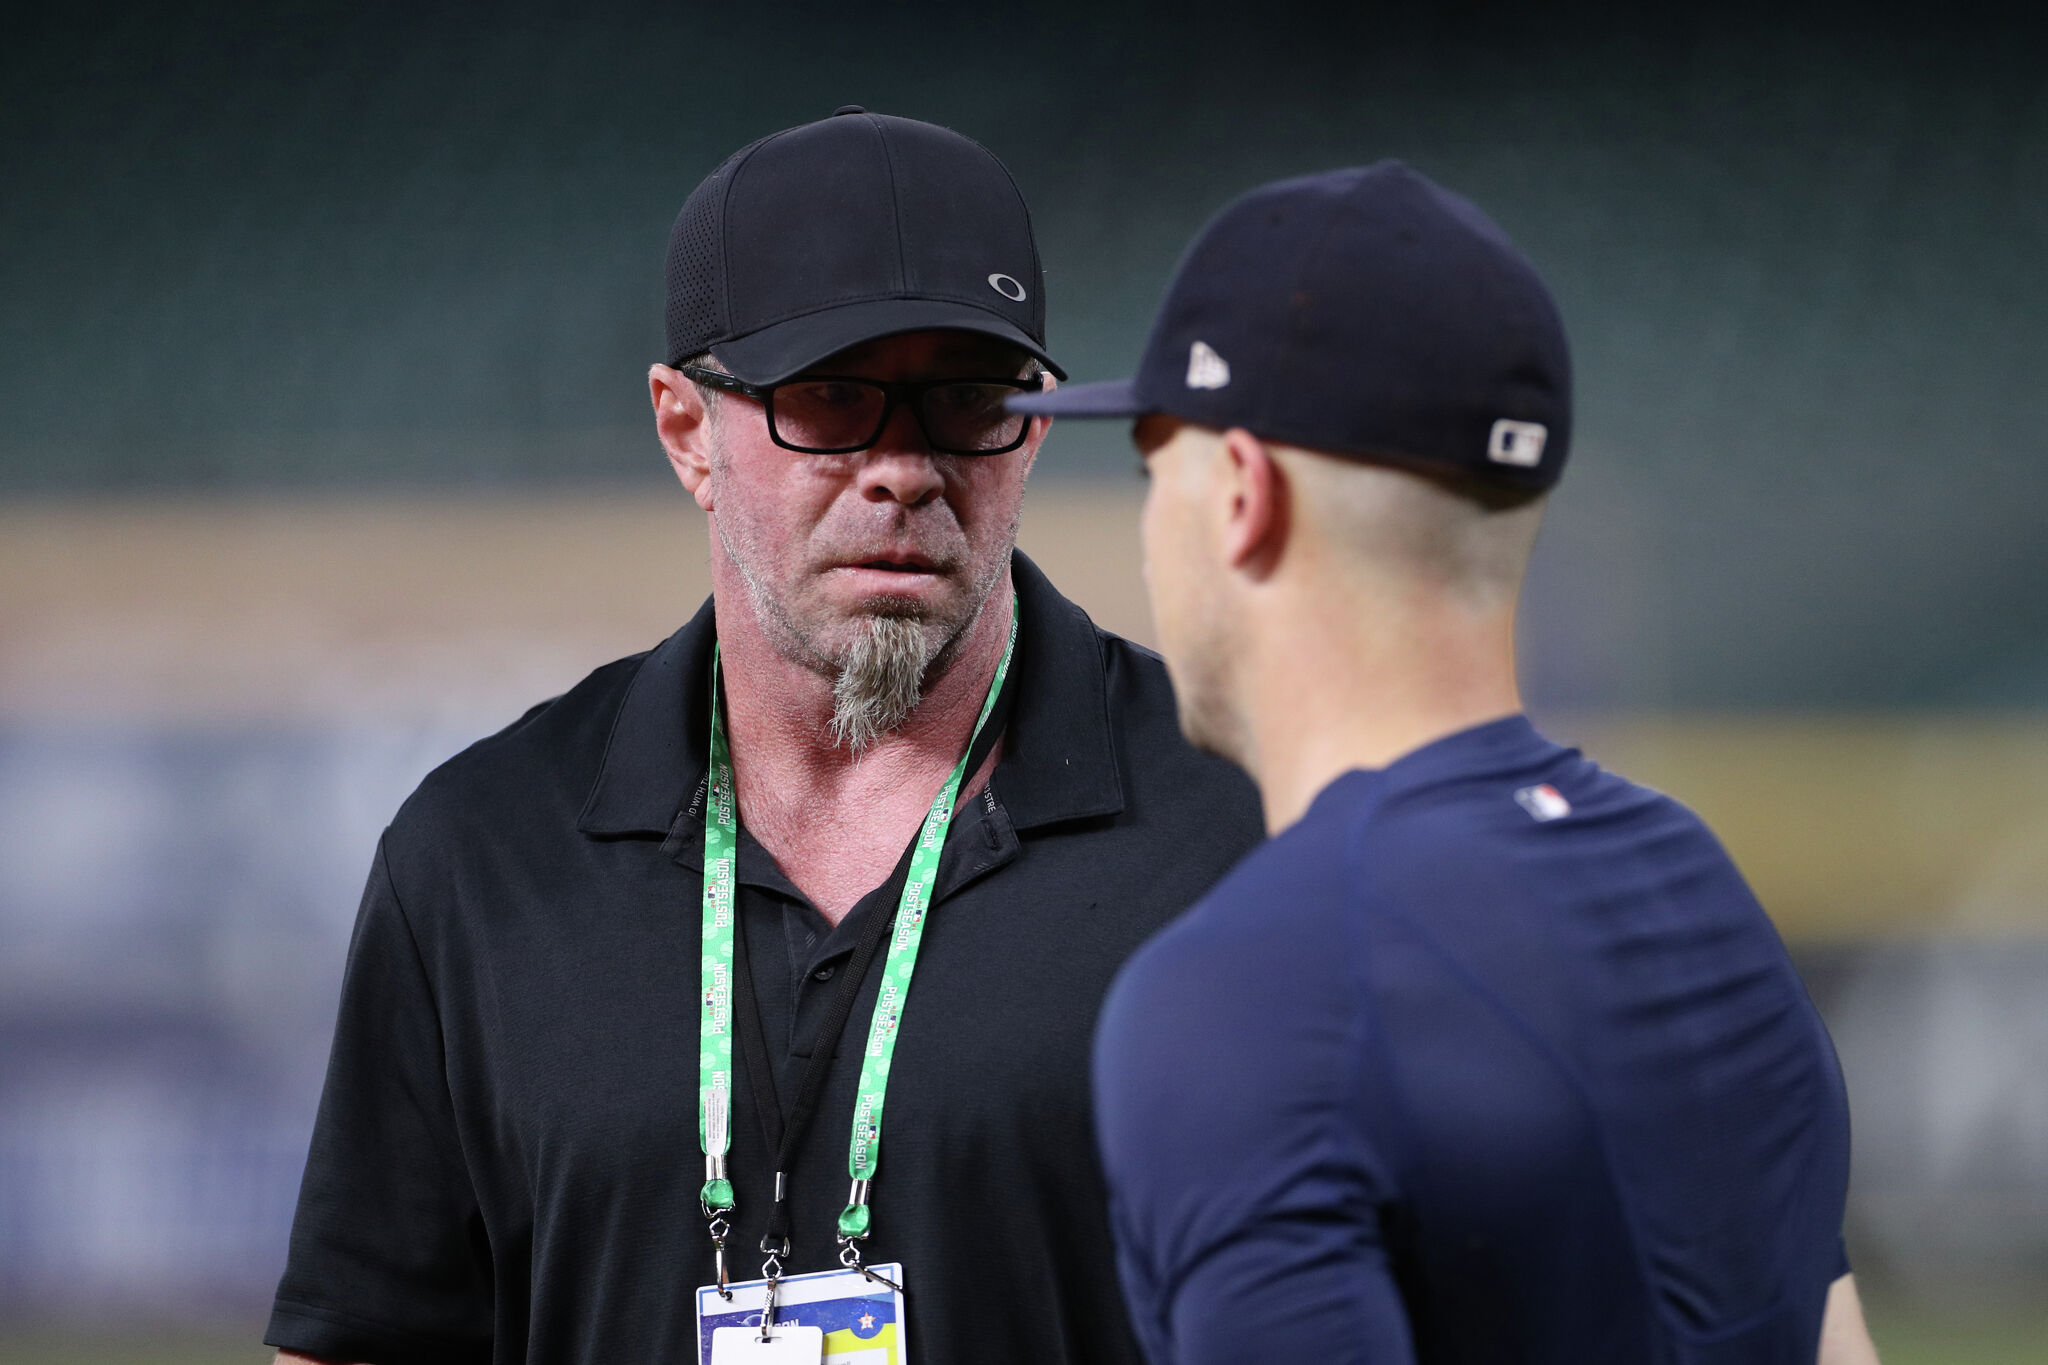 Jeff Bagwell doesn't want Astros GM job, details role with team